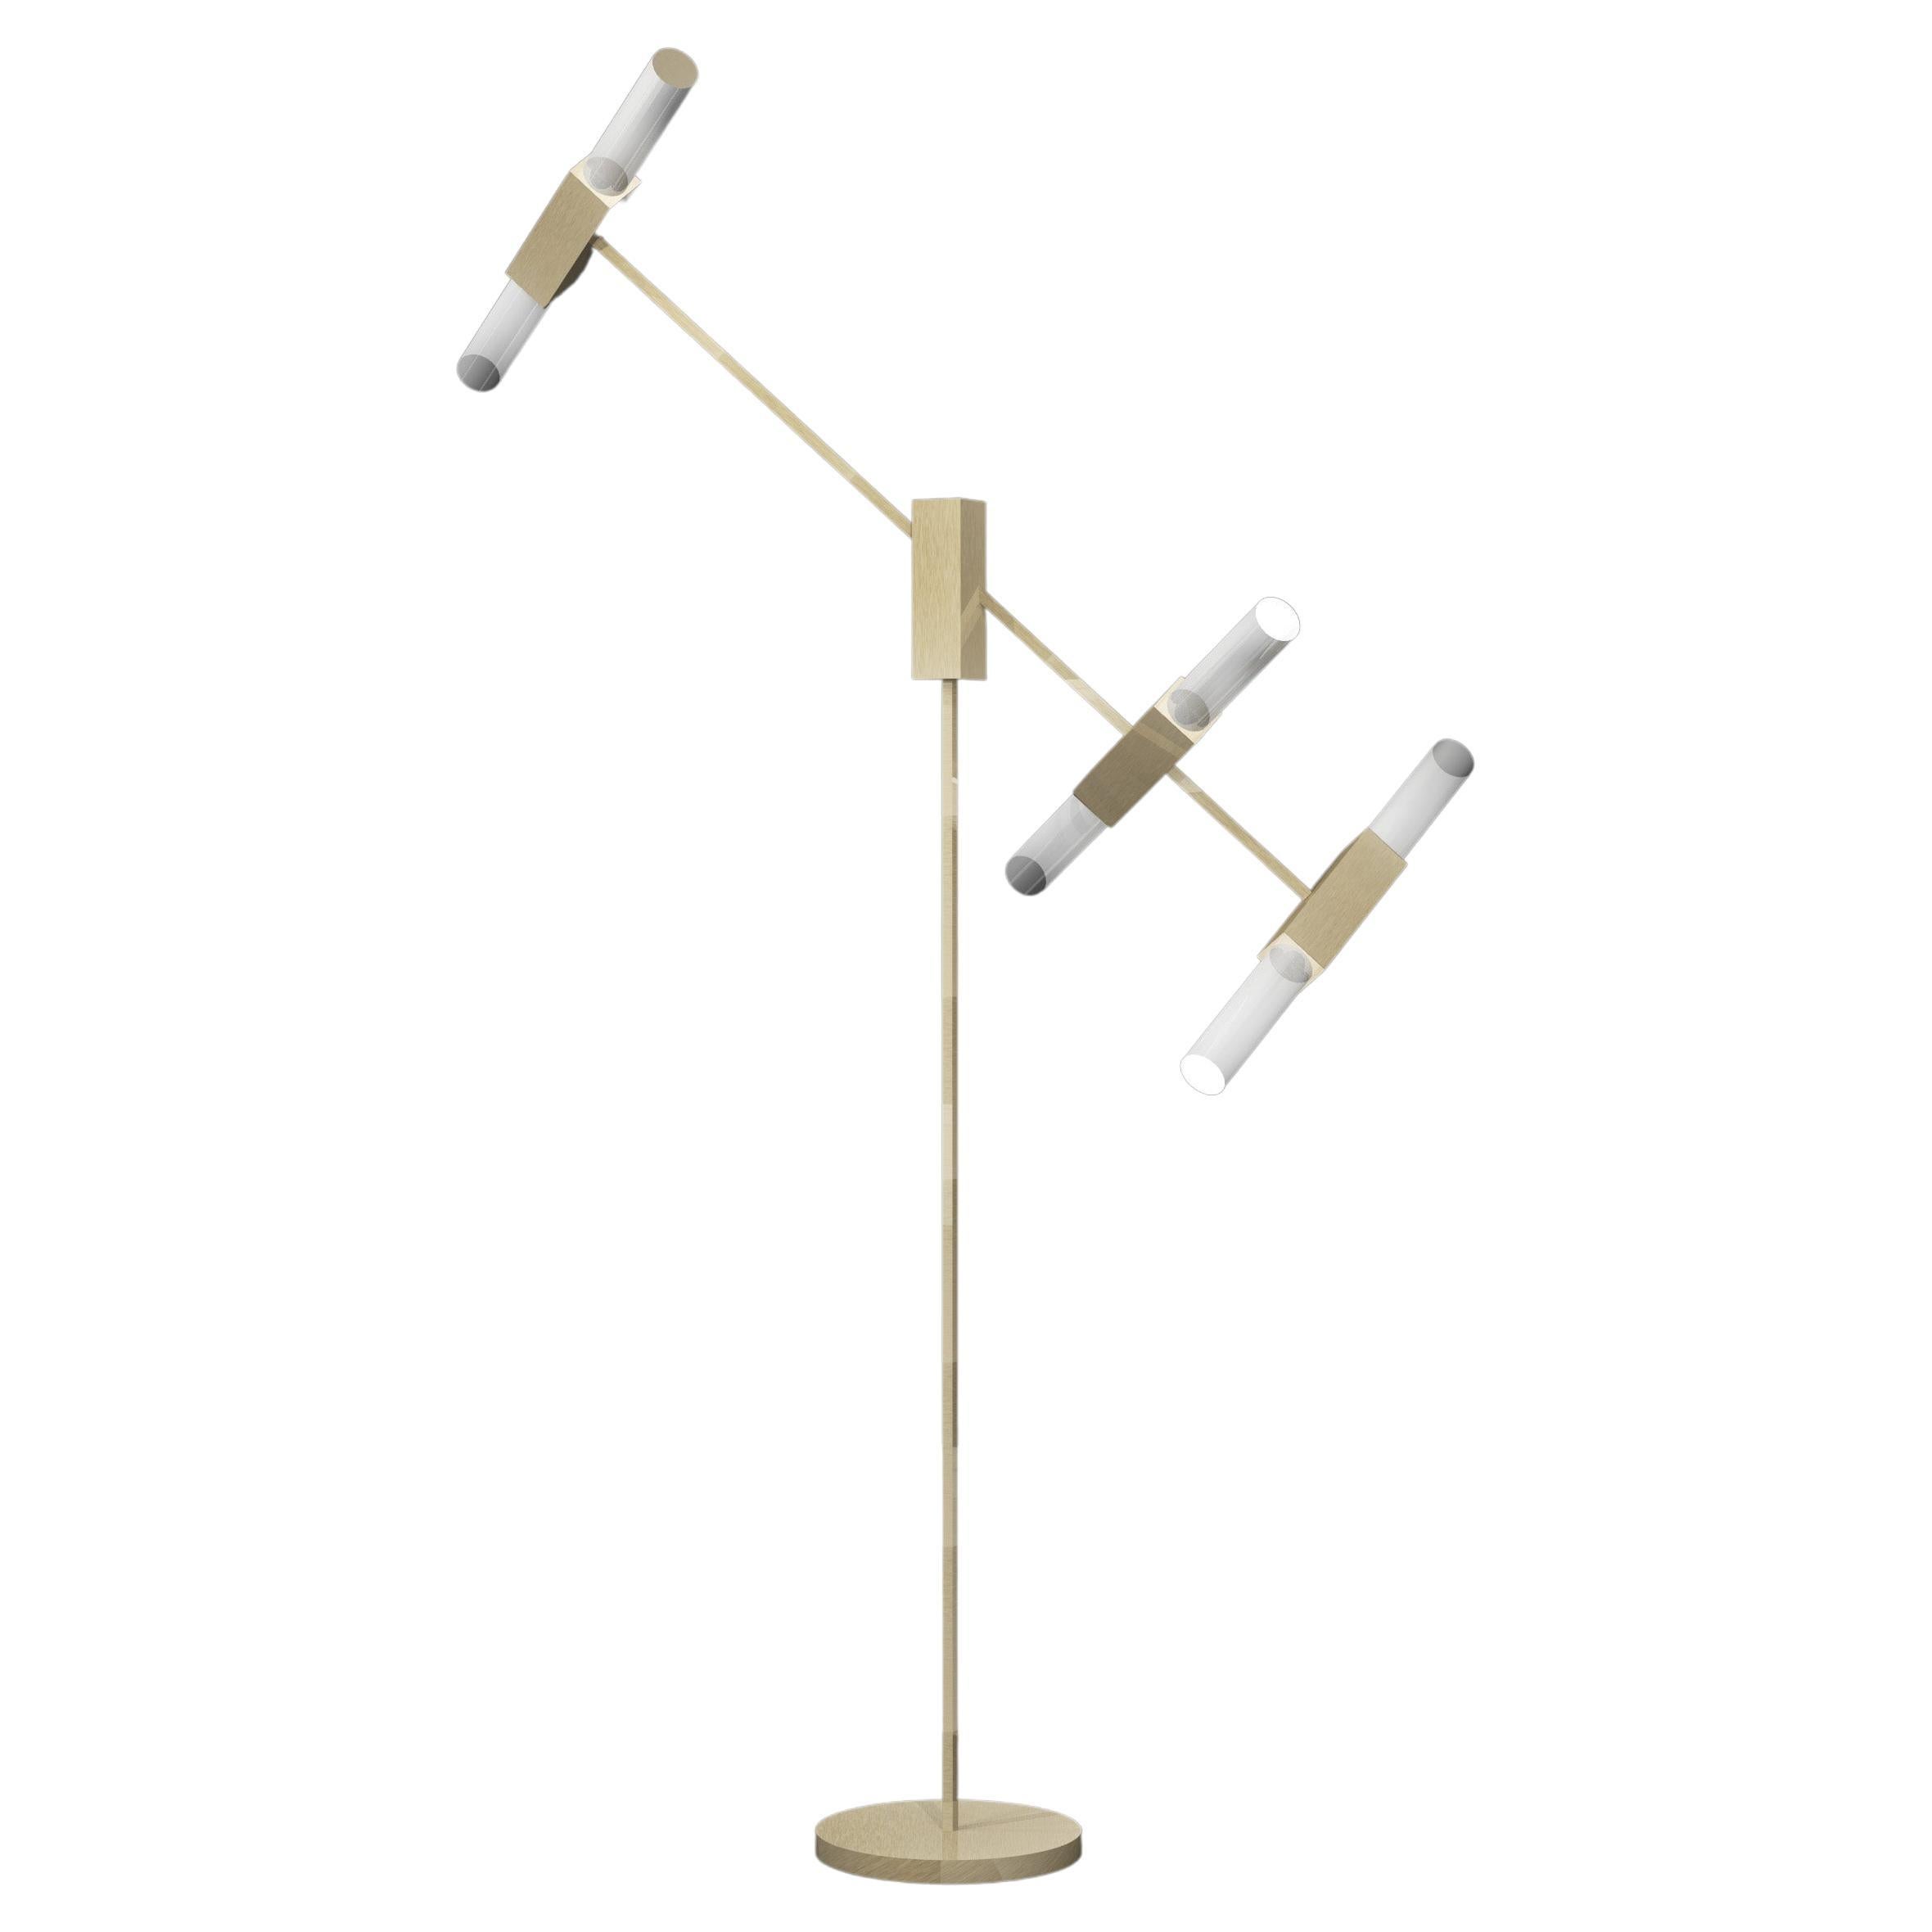 Imagin Tubular Floor Lamp in Brushed Brass and Frosted Glass